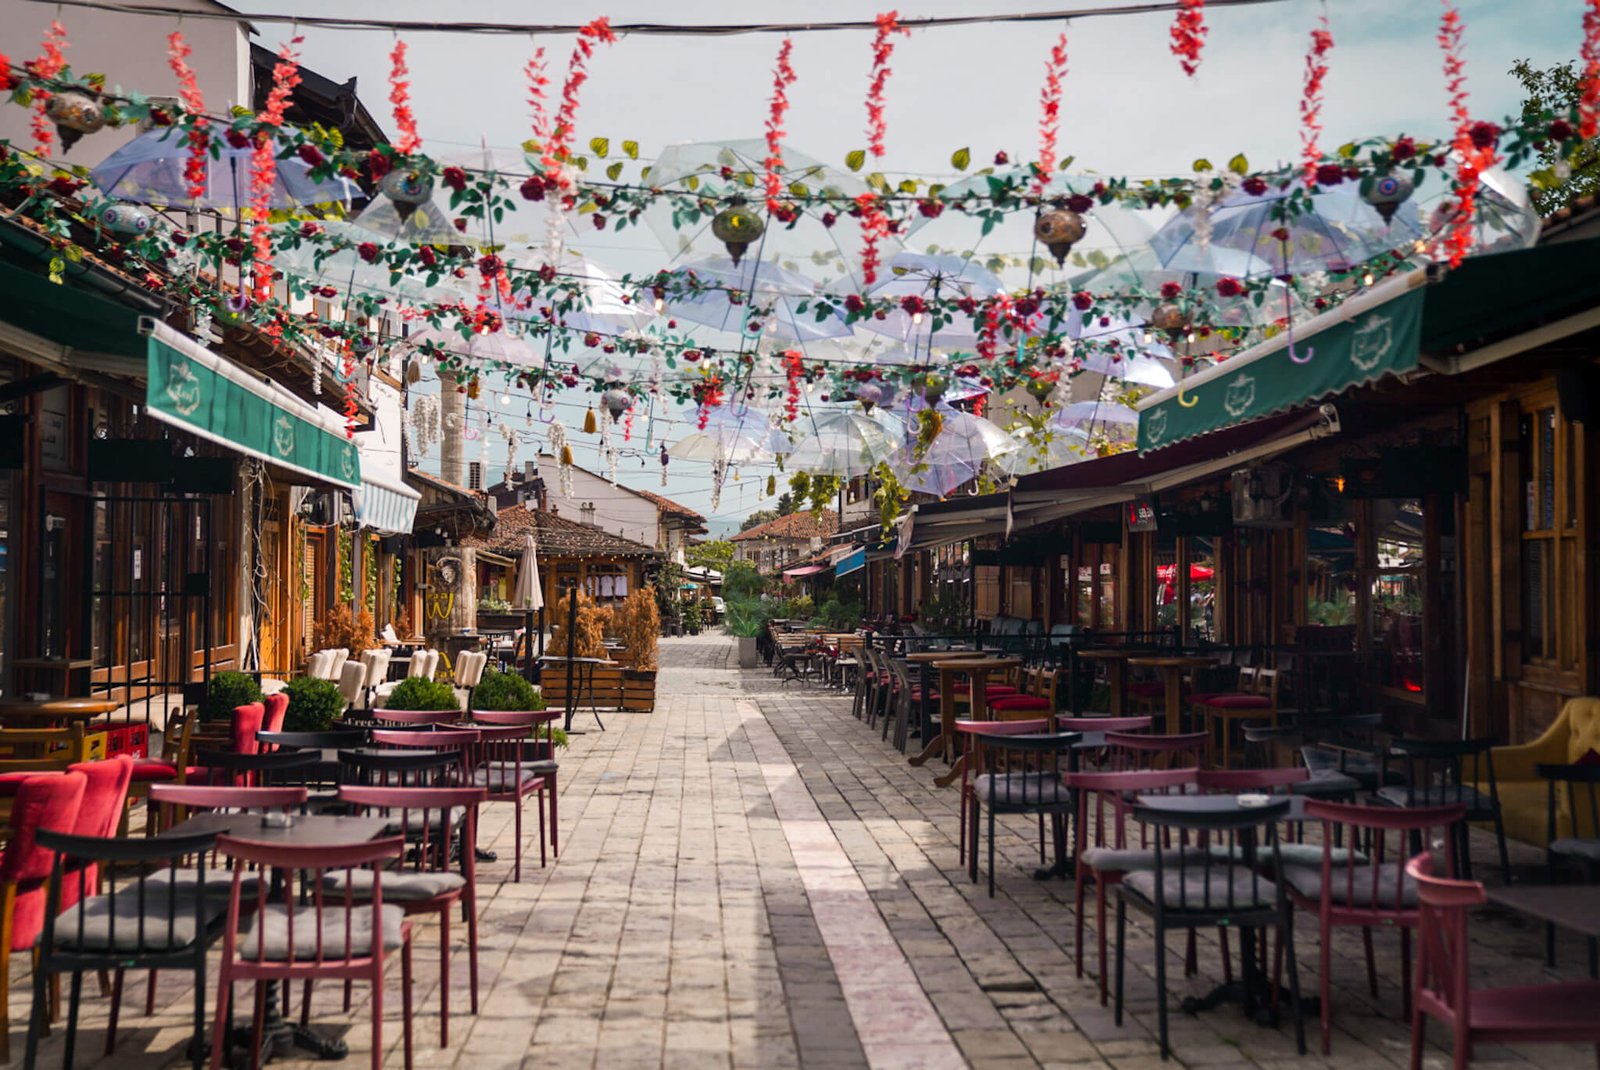 Gjakove, cute town in Kosovo, a country under the radar